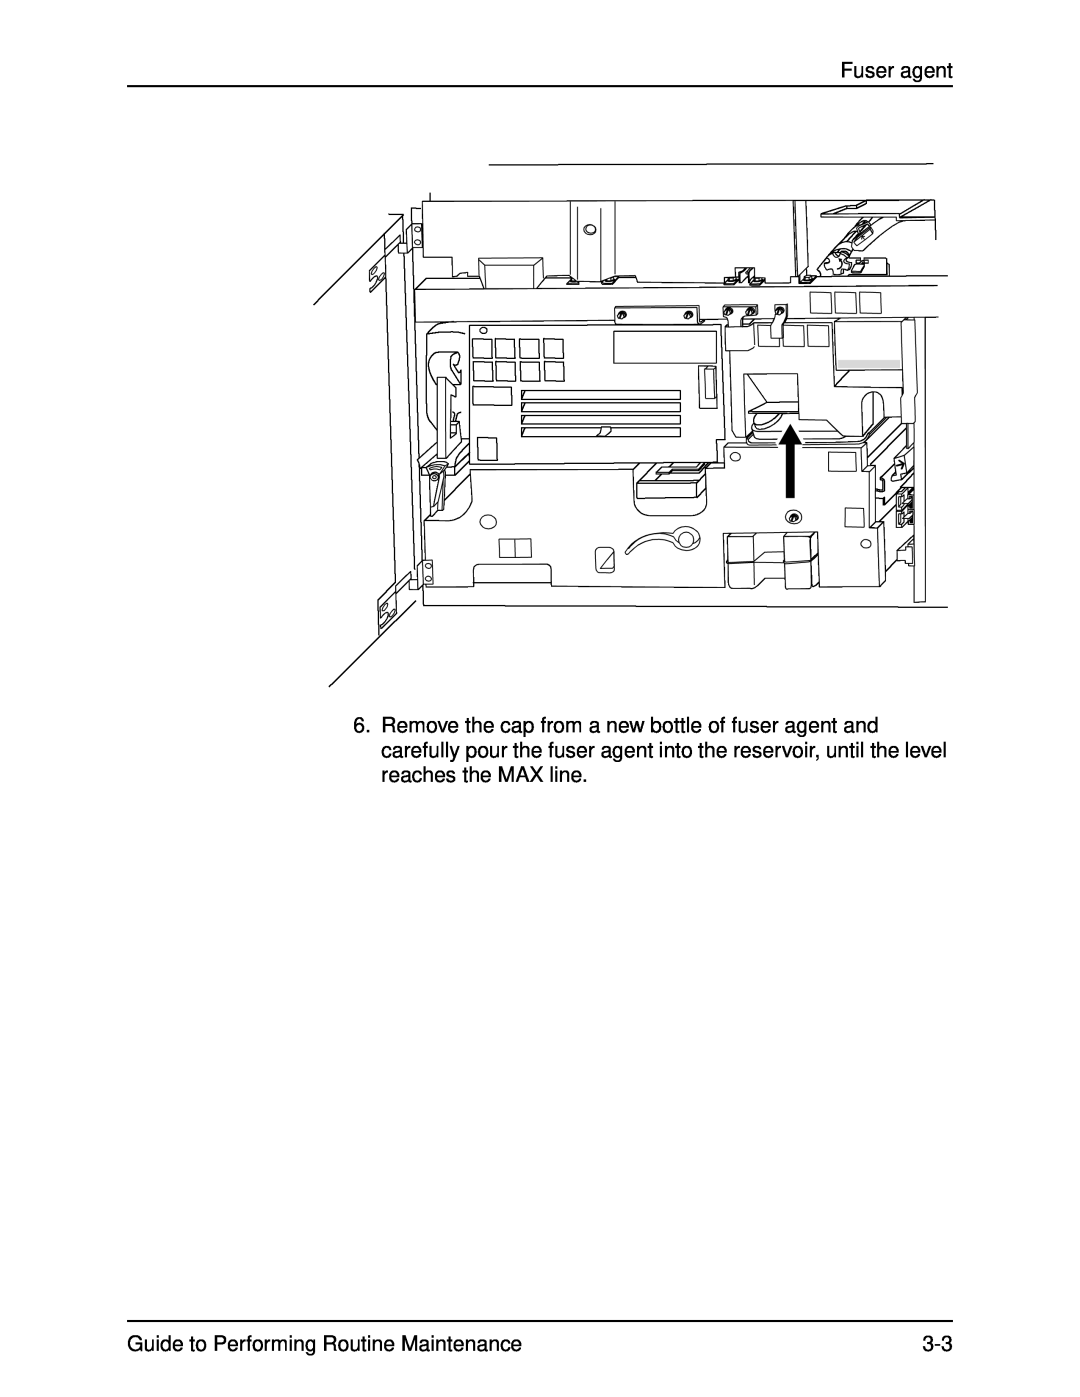 Xerox DocuPrint 96 manual Fuser agent, Guide to Performing Routine Maintenance 